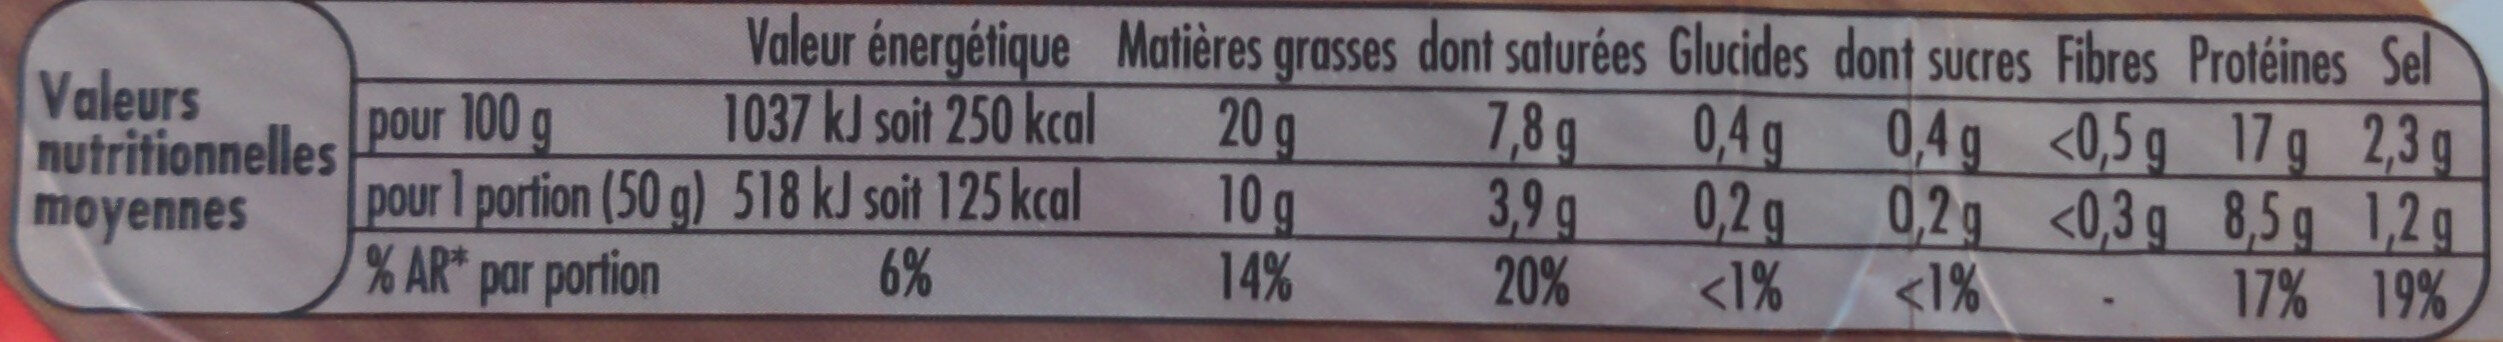 Allumettes nature - Nutrition facts - fr